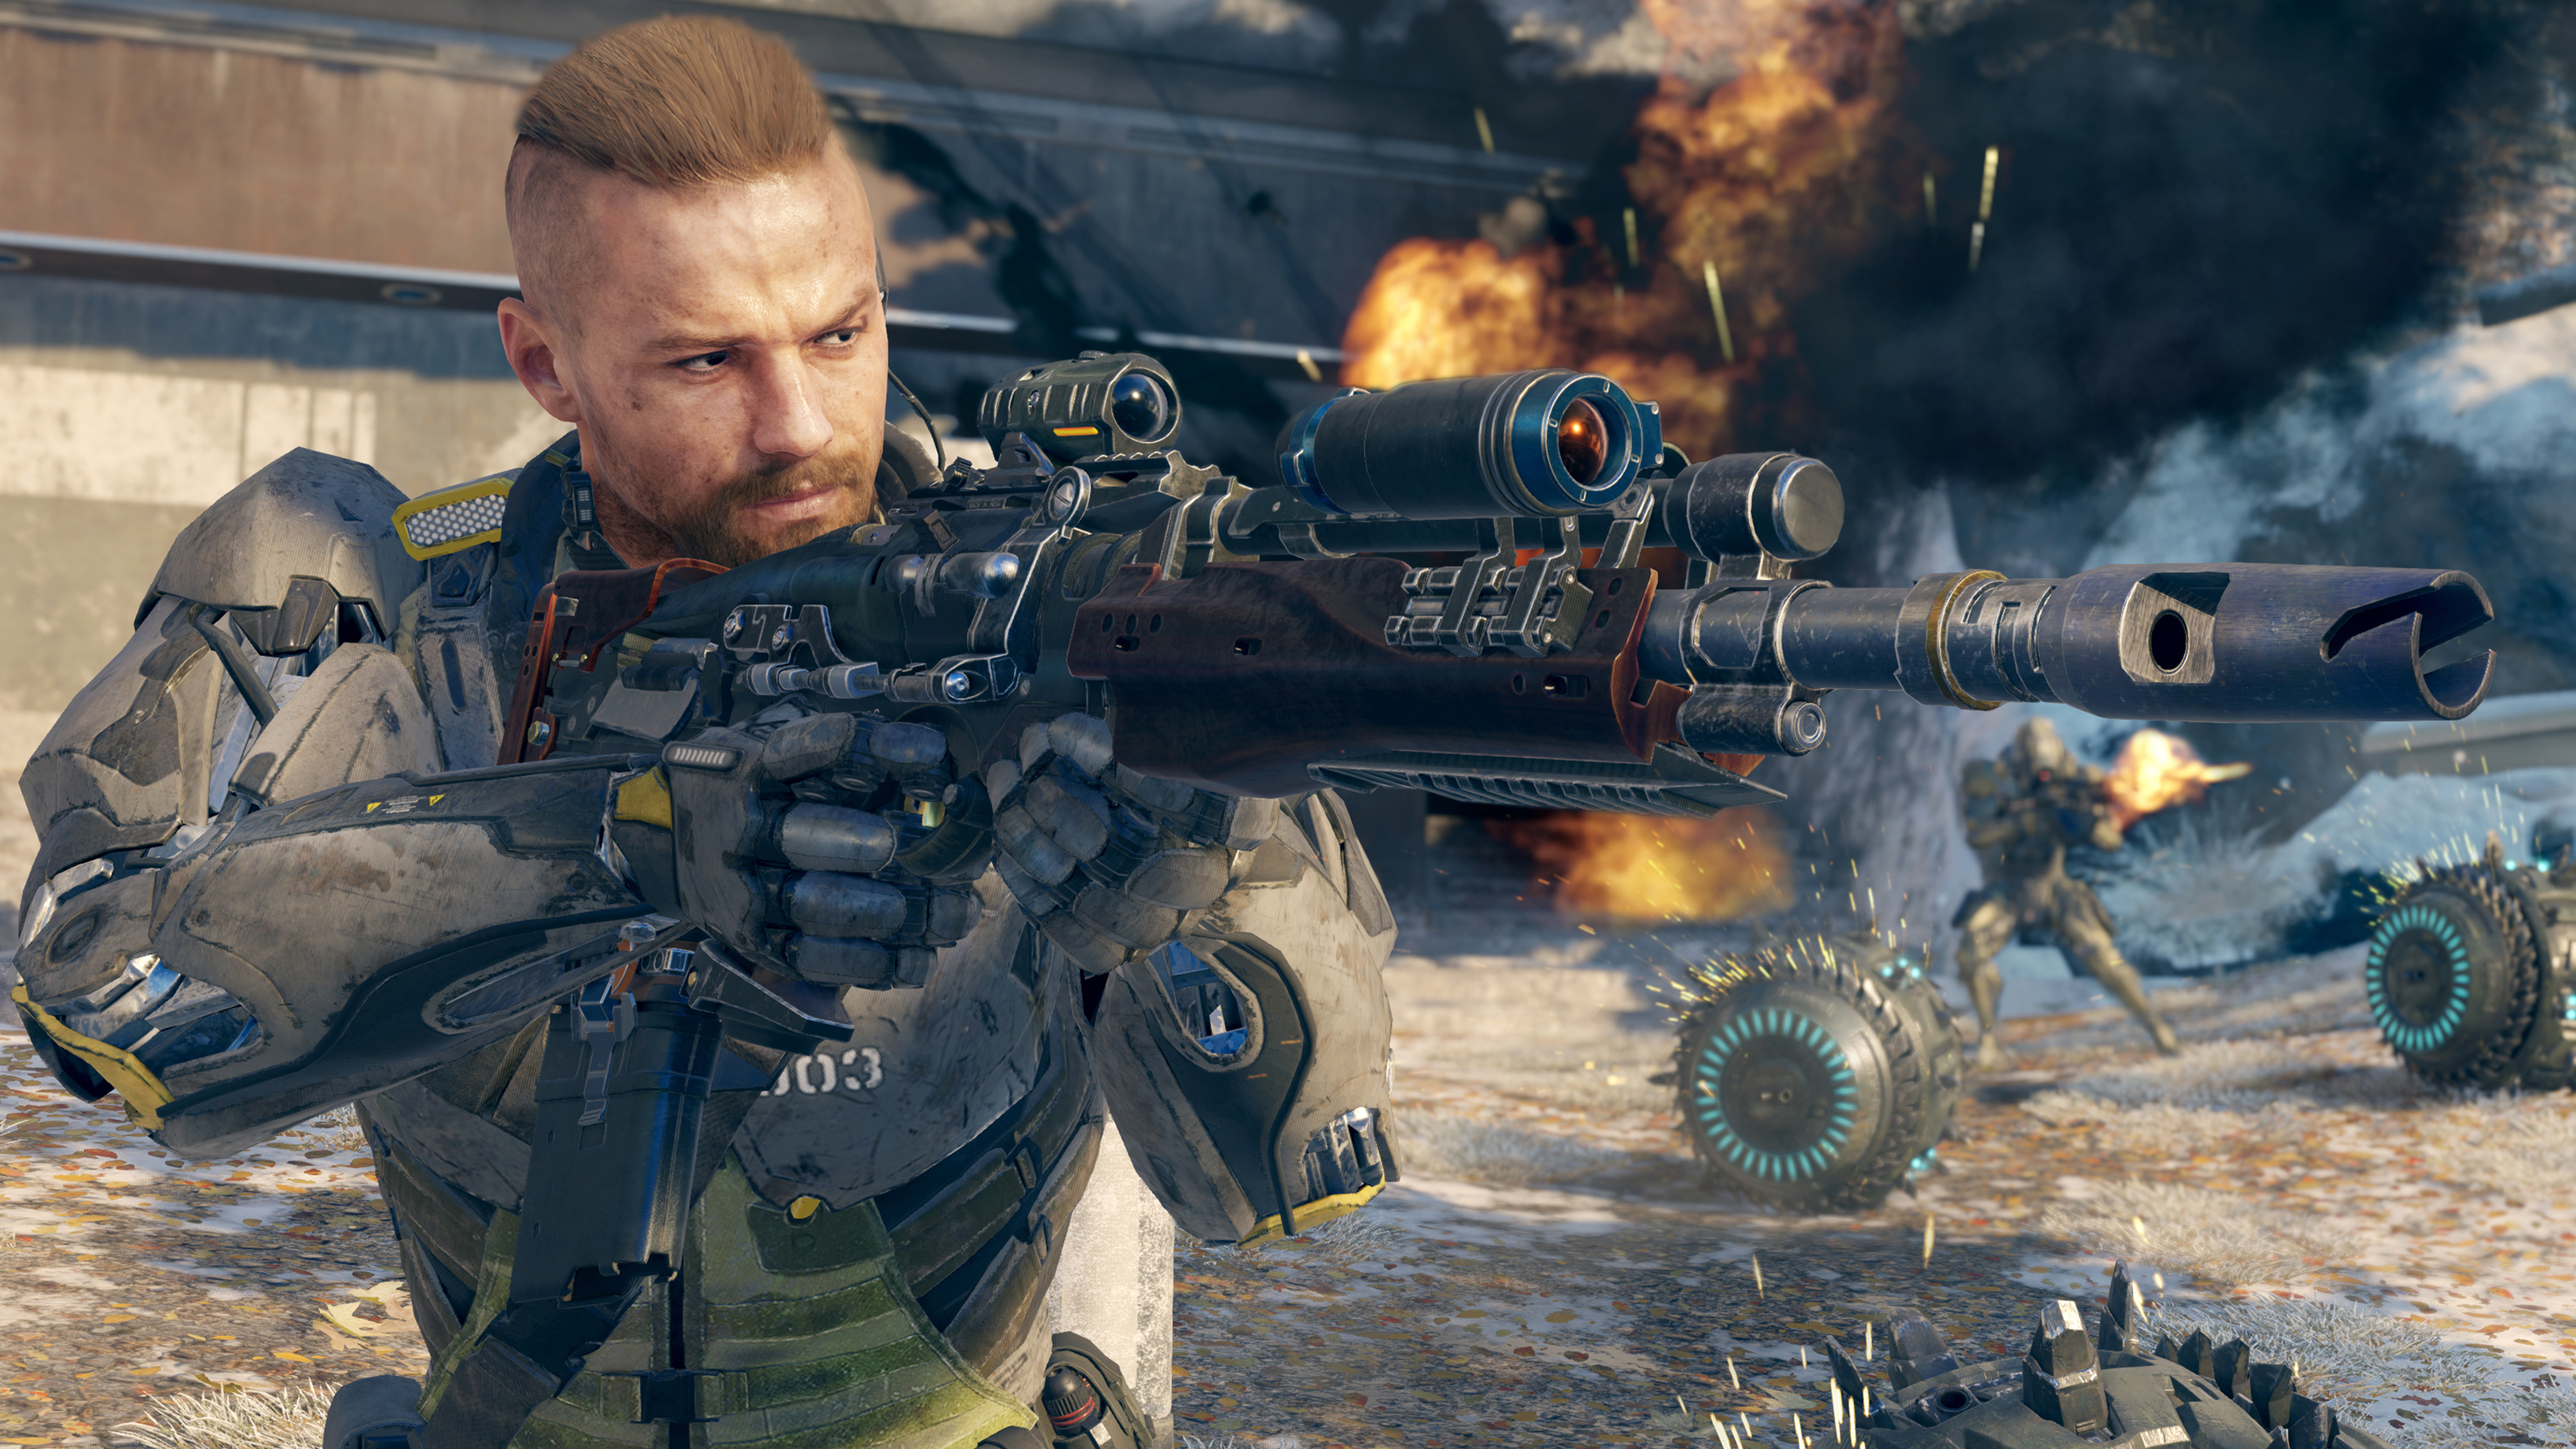 New Call of Duty everything we know so far about the next COD game